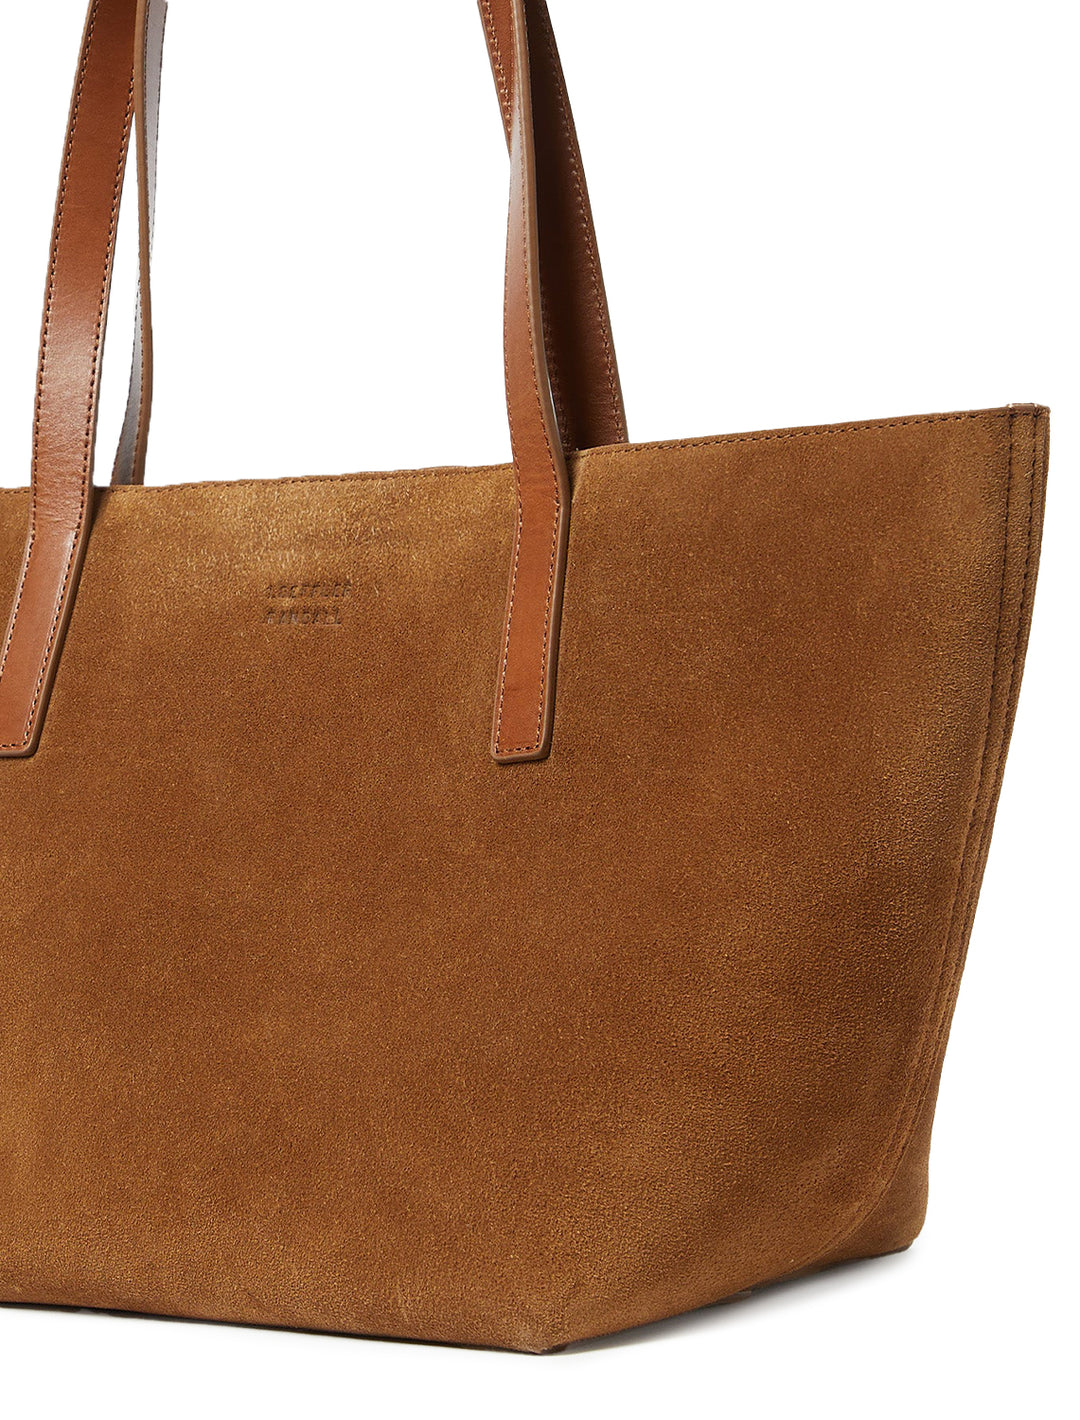 Close-up view of Loeffler Randall's easton medium tote in cacao.